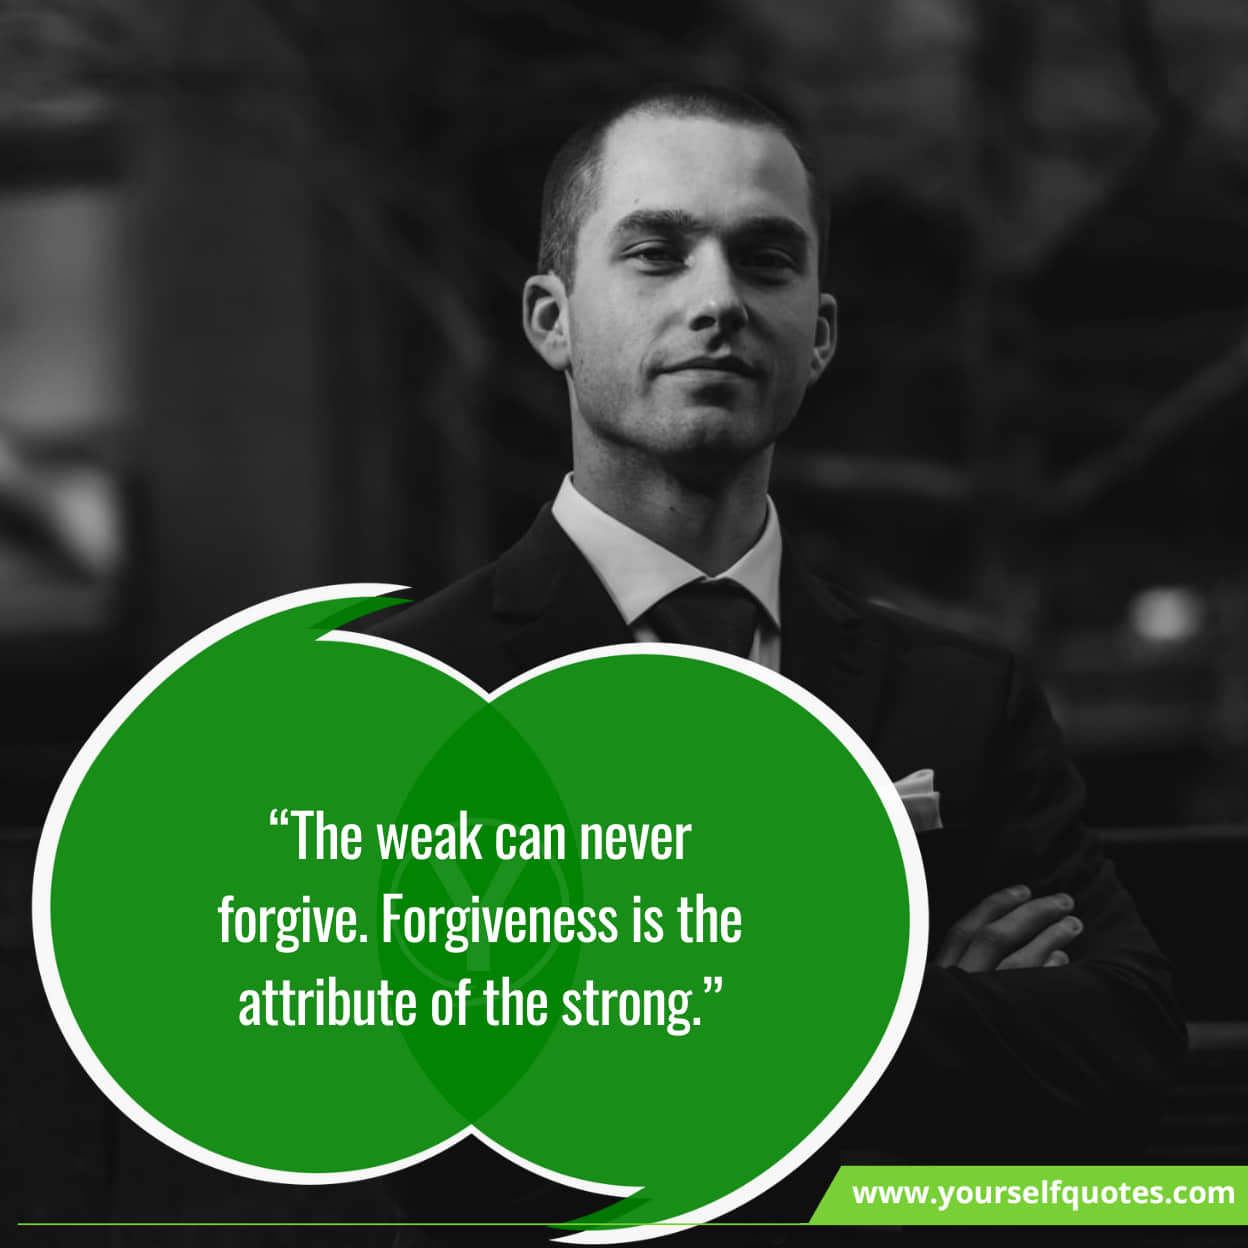 Best Famous Quotes On Forgiveness